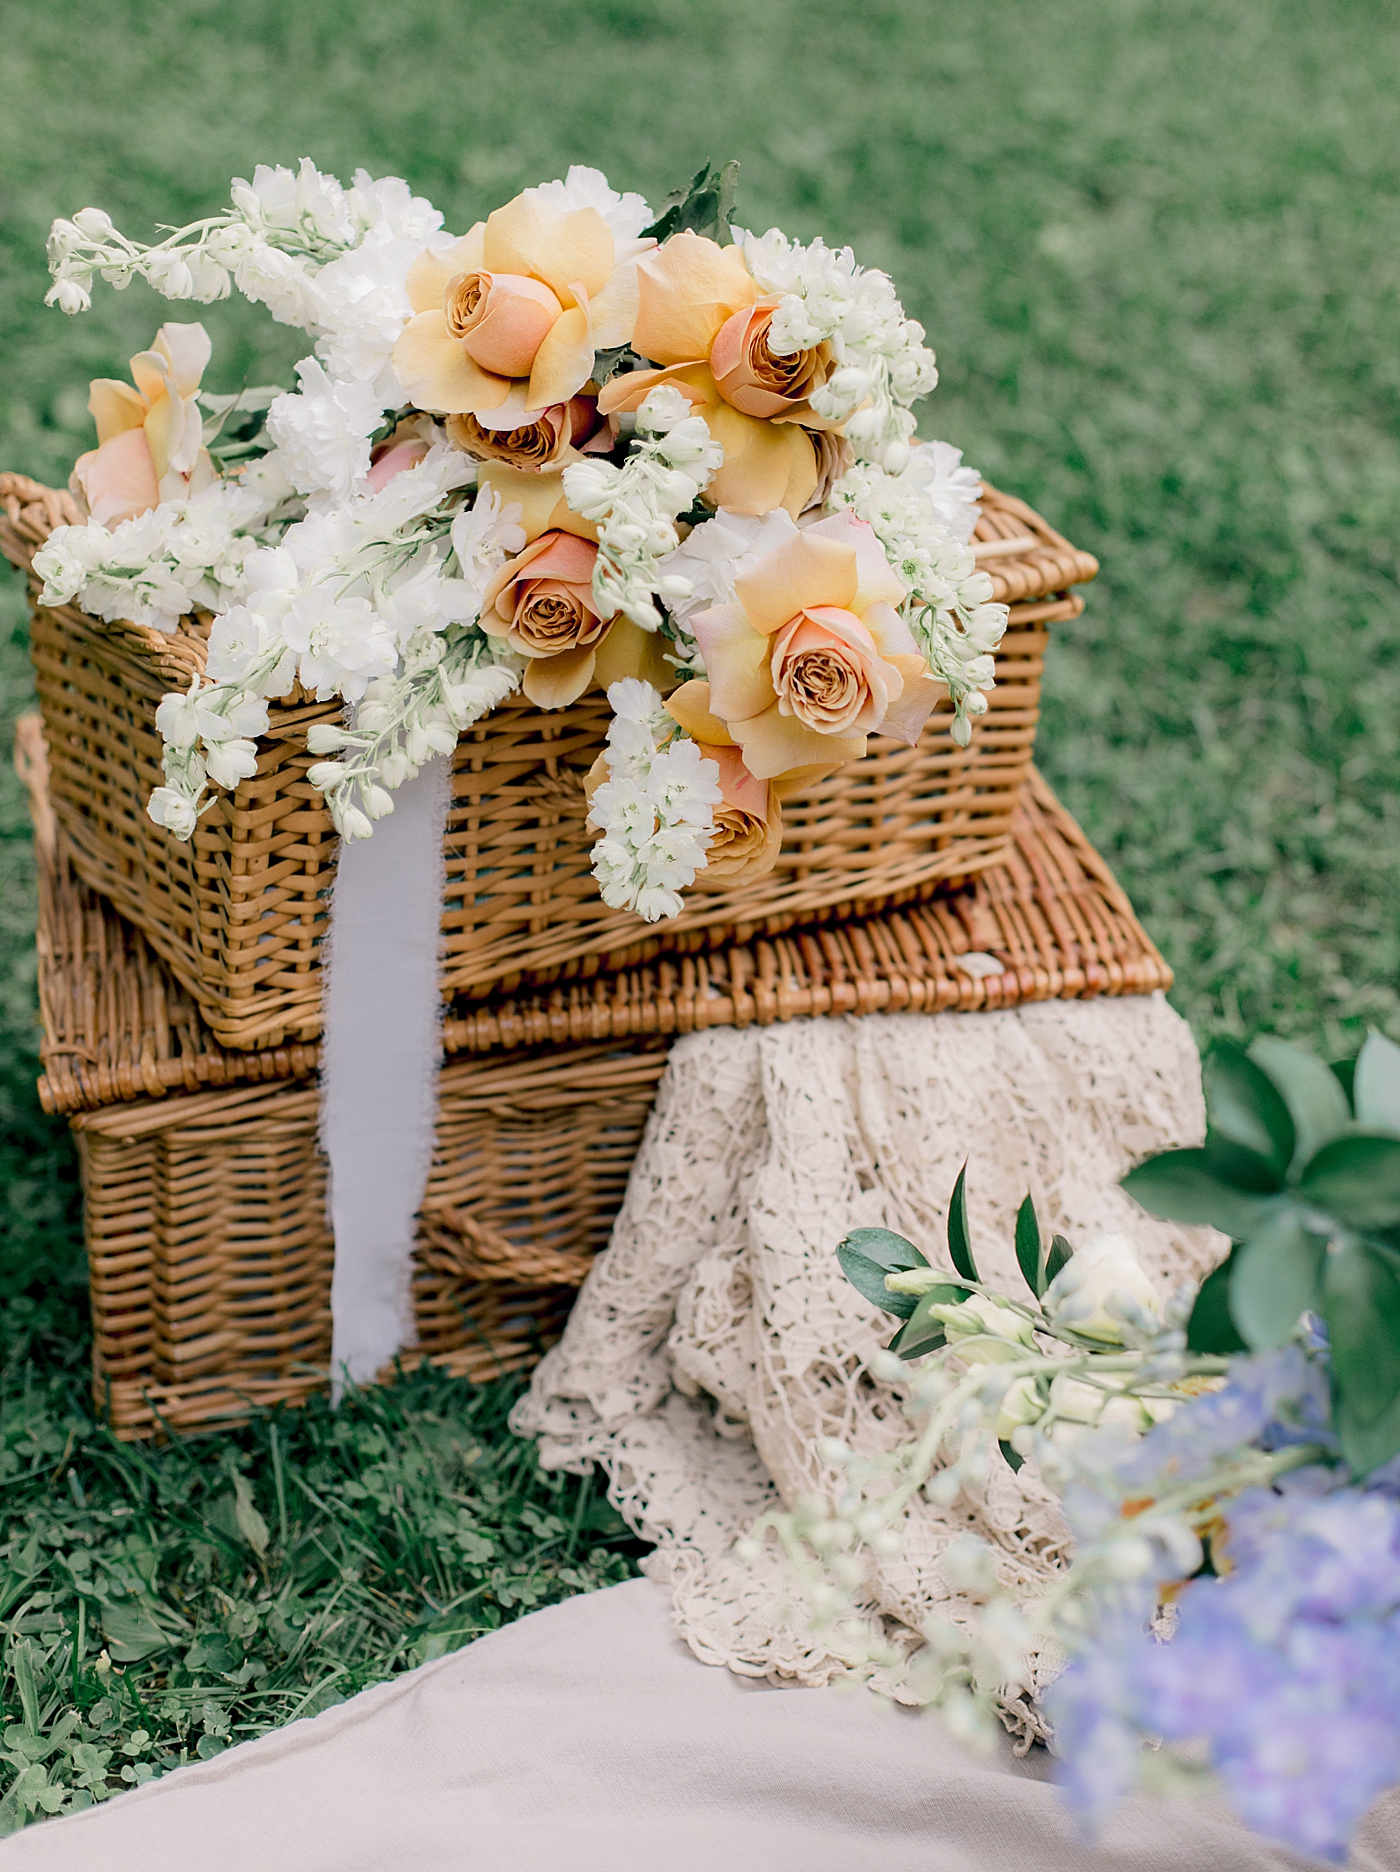 Bouquet of peach roses and white stock flowers on picnic baskets | Styling and Planning Engagement Sessions with Hope Helmuth Photography